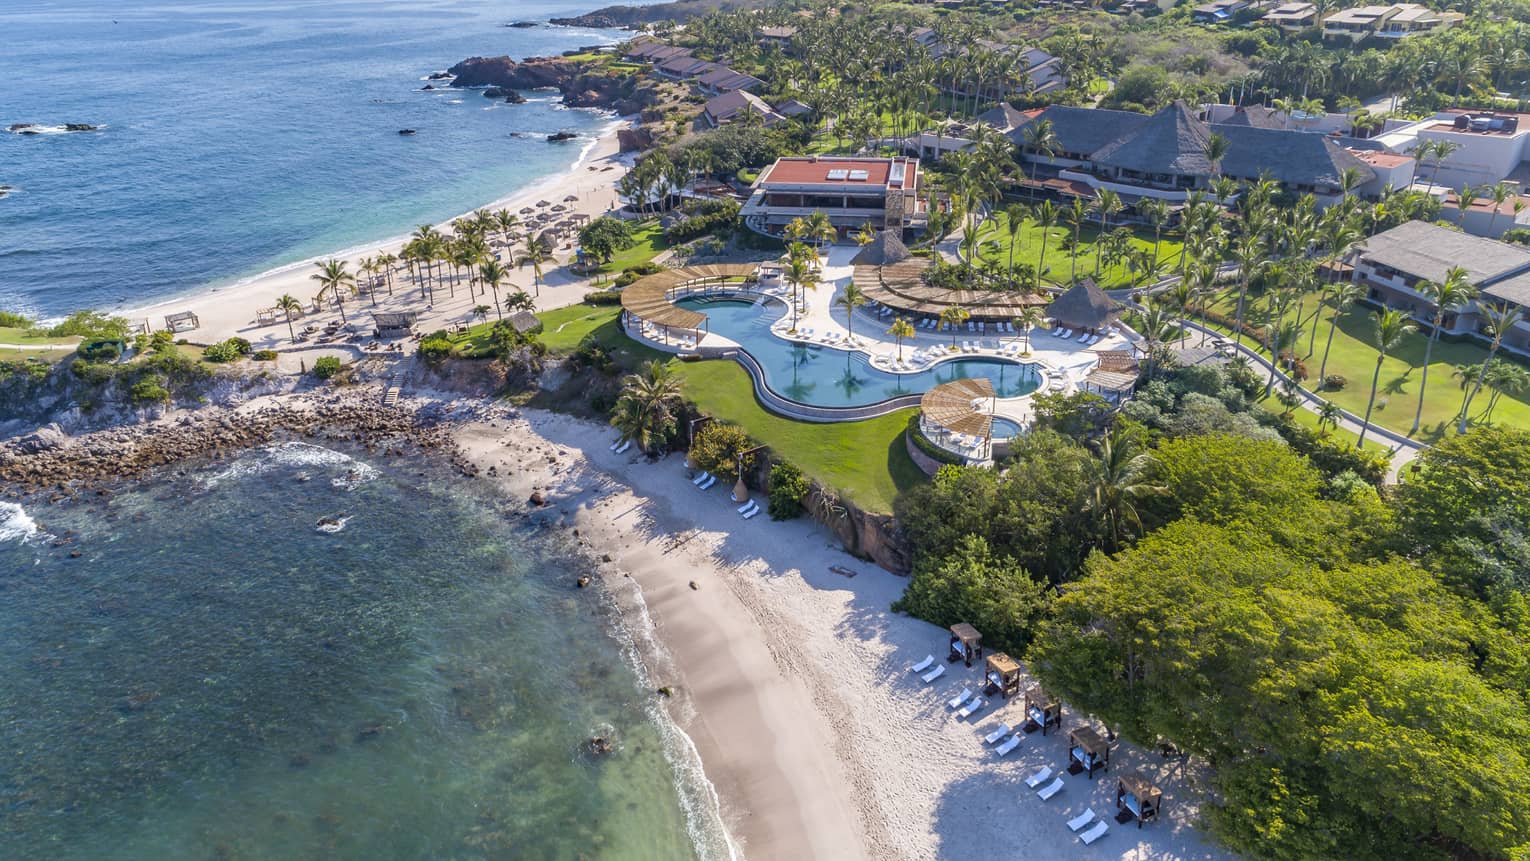 An aerial view of a beach shore with a large property on it with an outdoor pool.